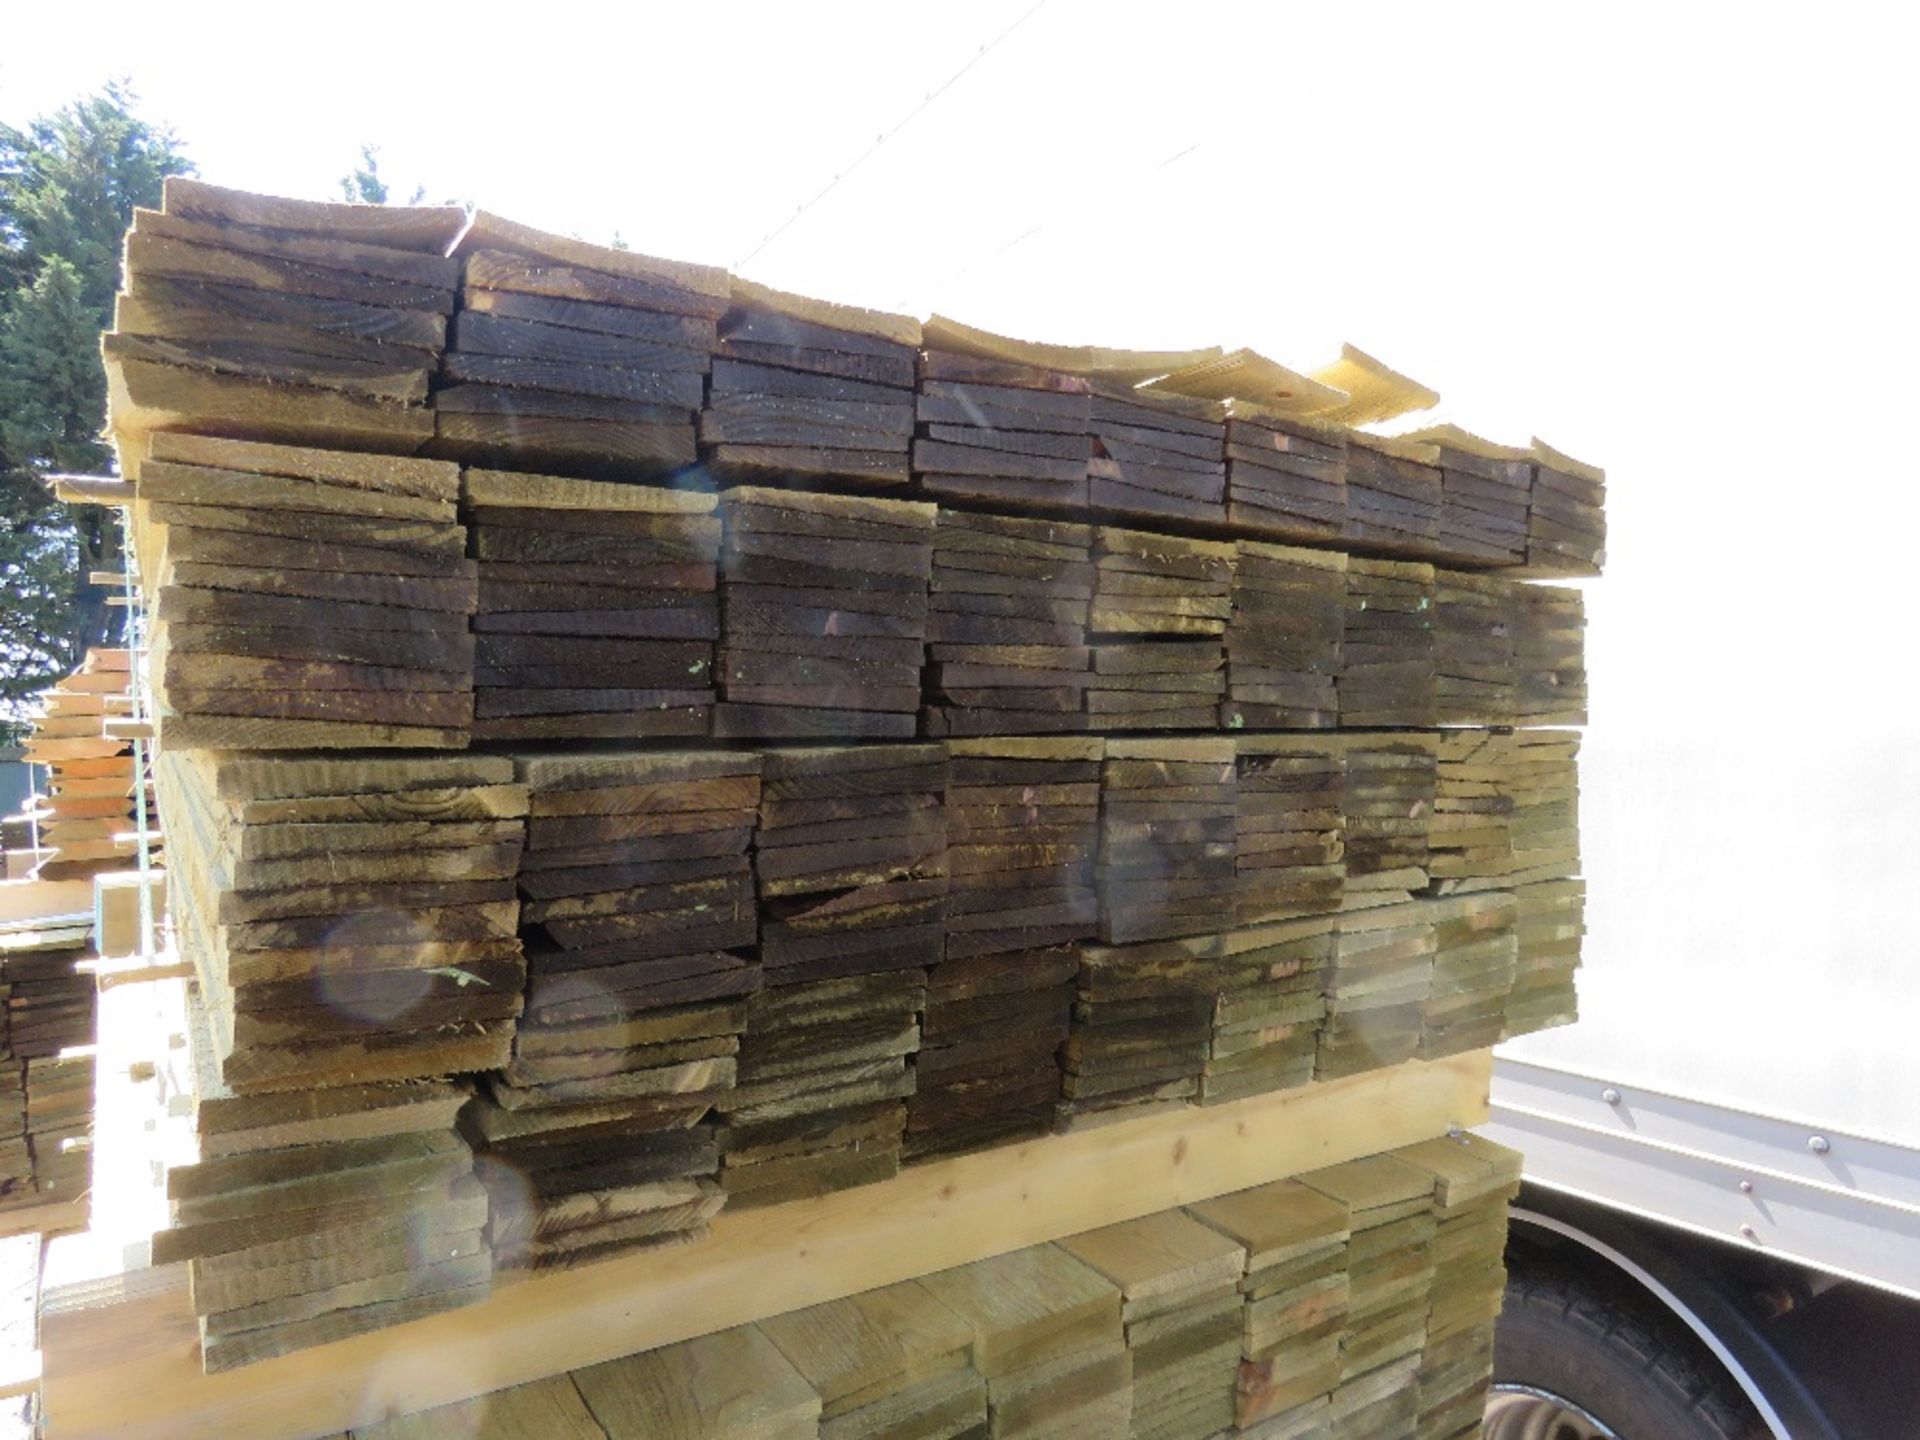 MEDIUM PACK OF PRESSURE TREATED FEATHER EDGE CLADDING TIMBER BOARDS 1.65M LENGTH X 100MM WIDTH APPRO - Image 2 of 3